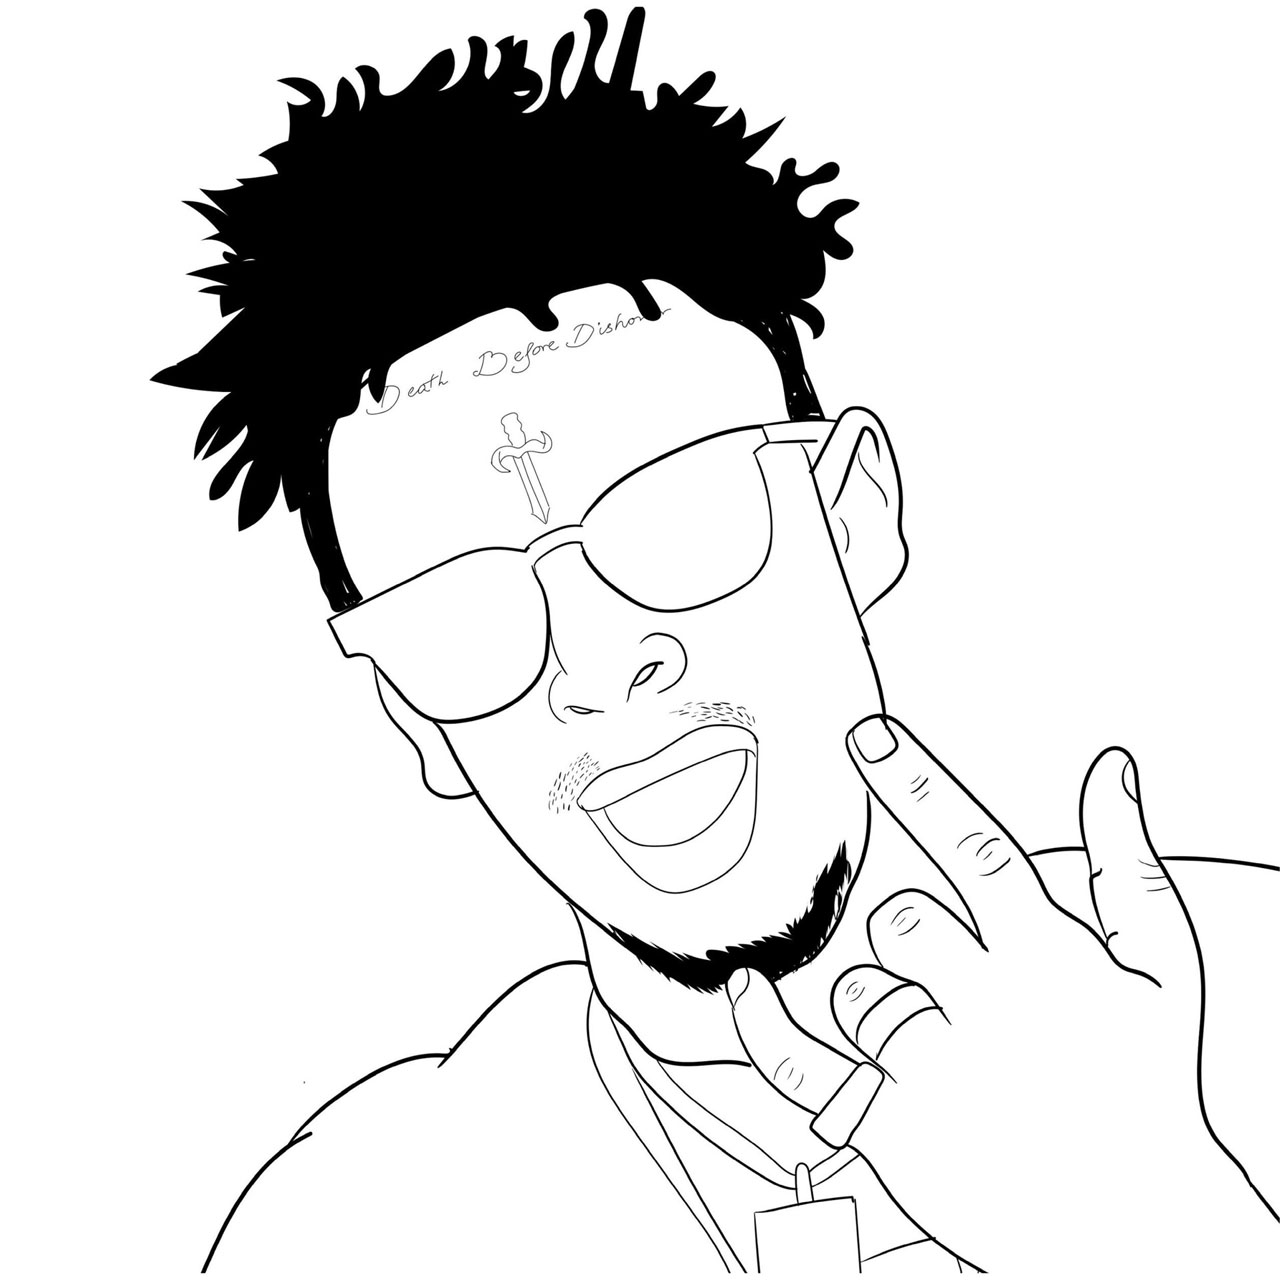 Free 21 Savage Coloring Pages by zane burkos printable